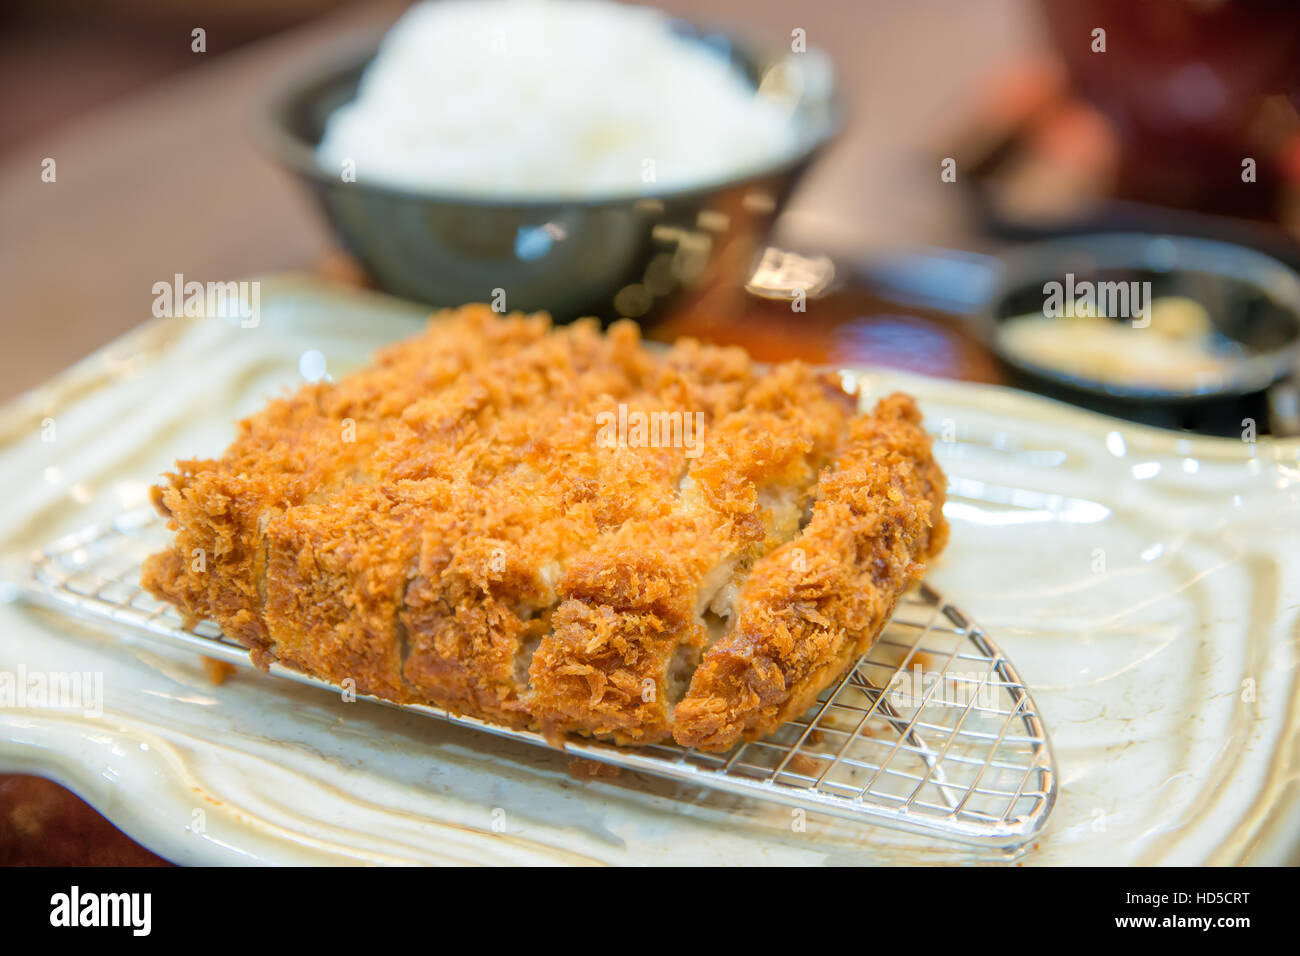 Fried Pork Cutlet serve with rice in dish at Japanese restaurant Stock Photo